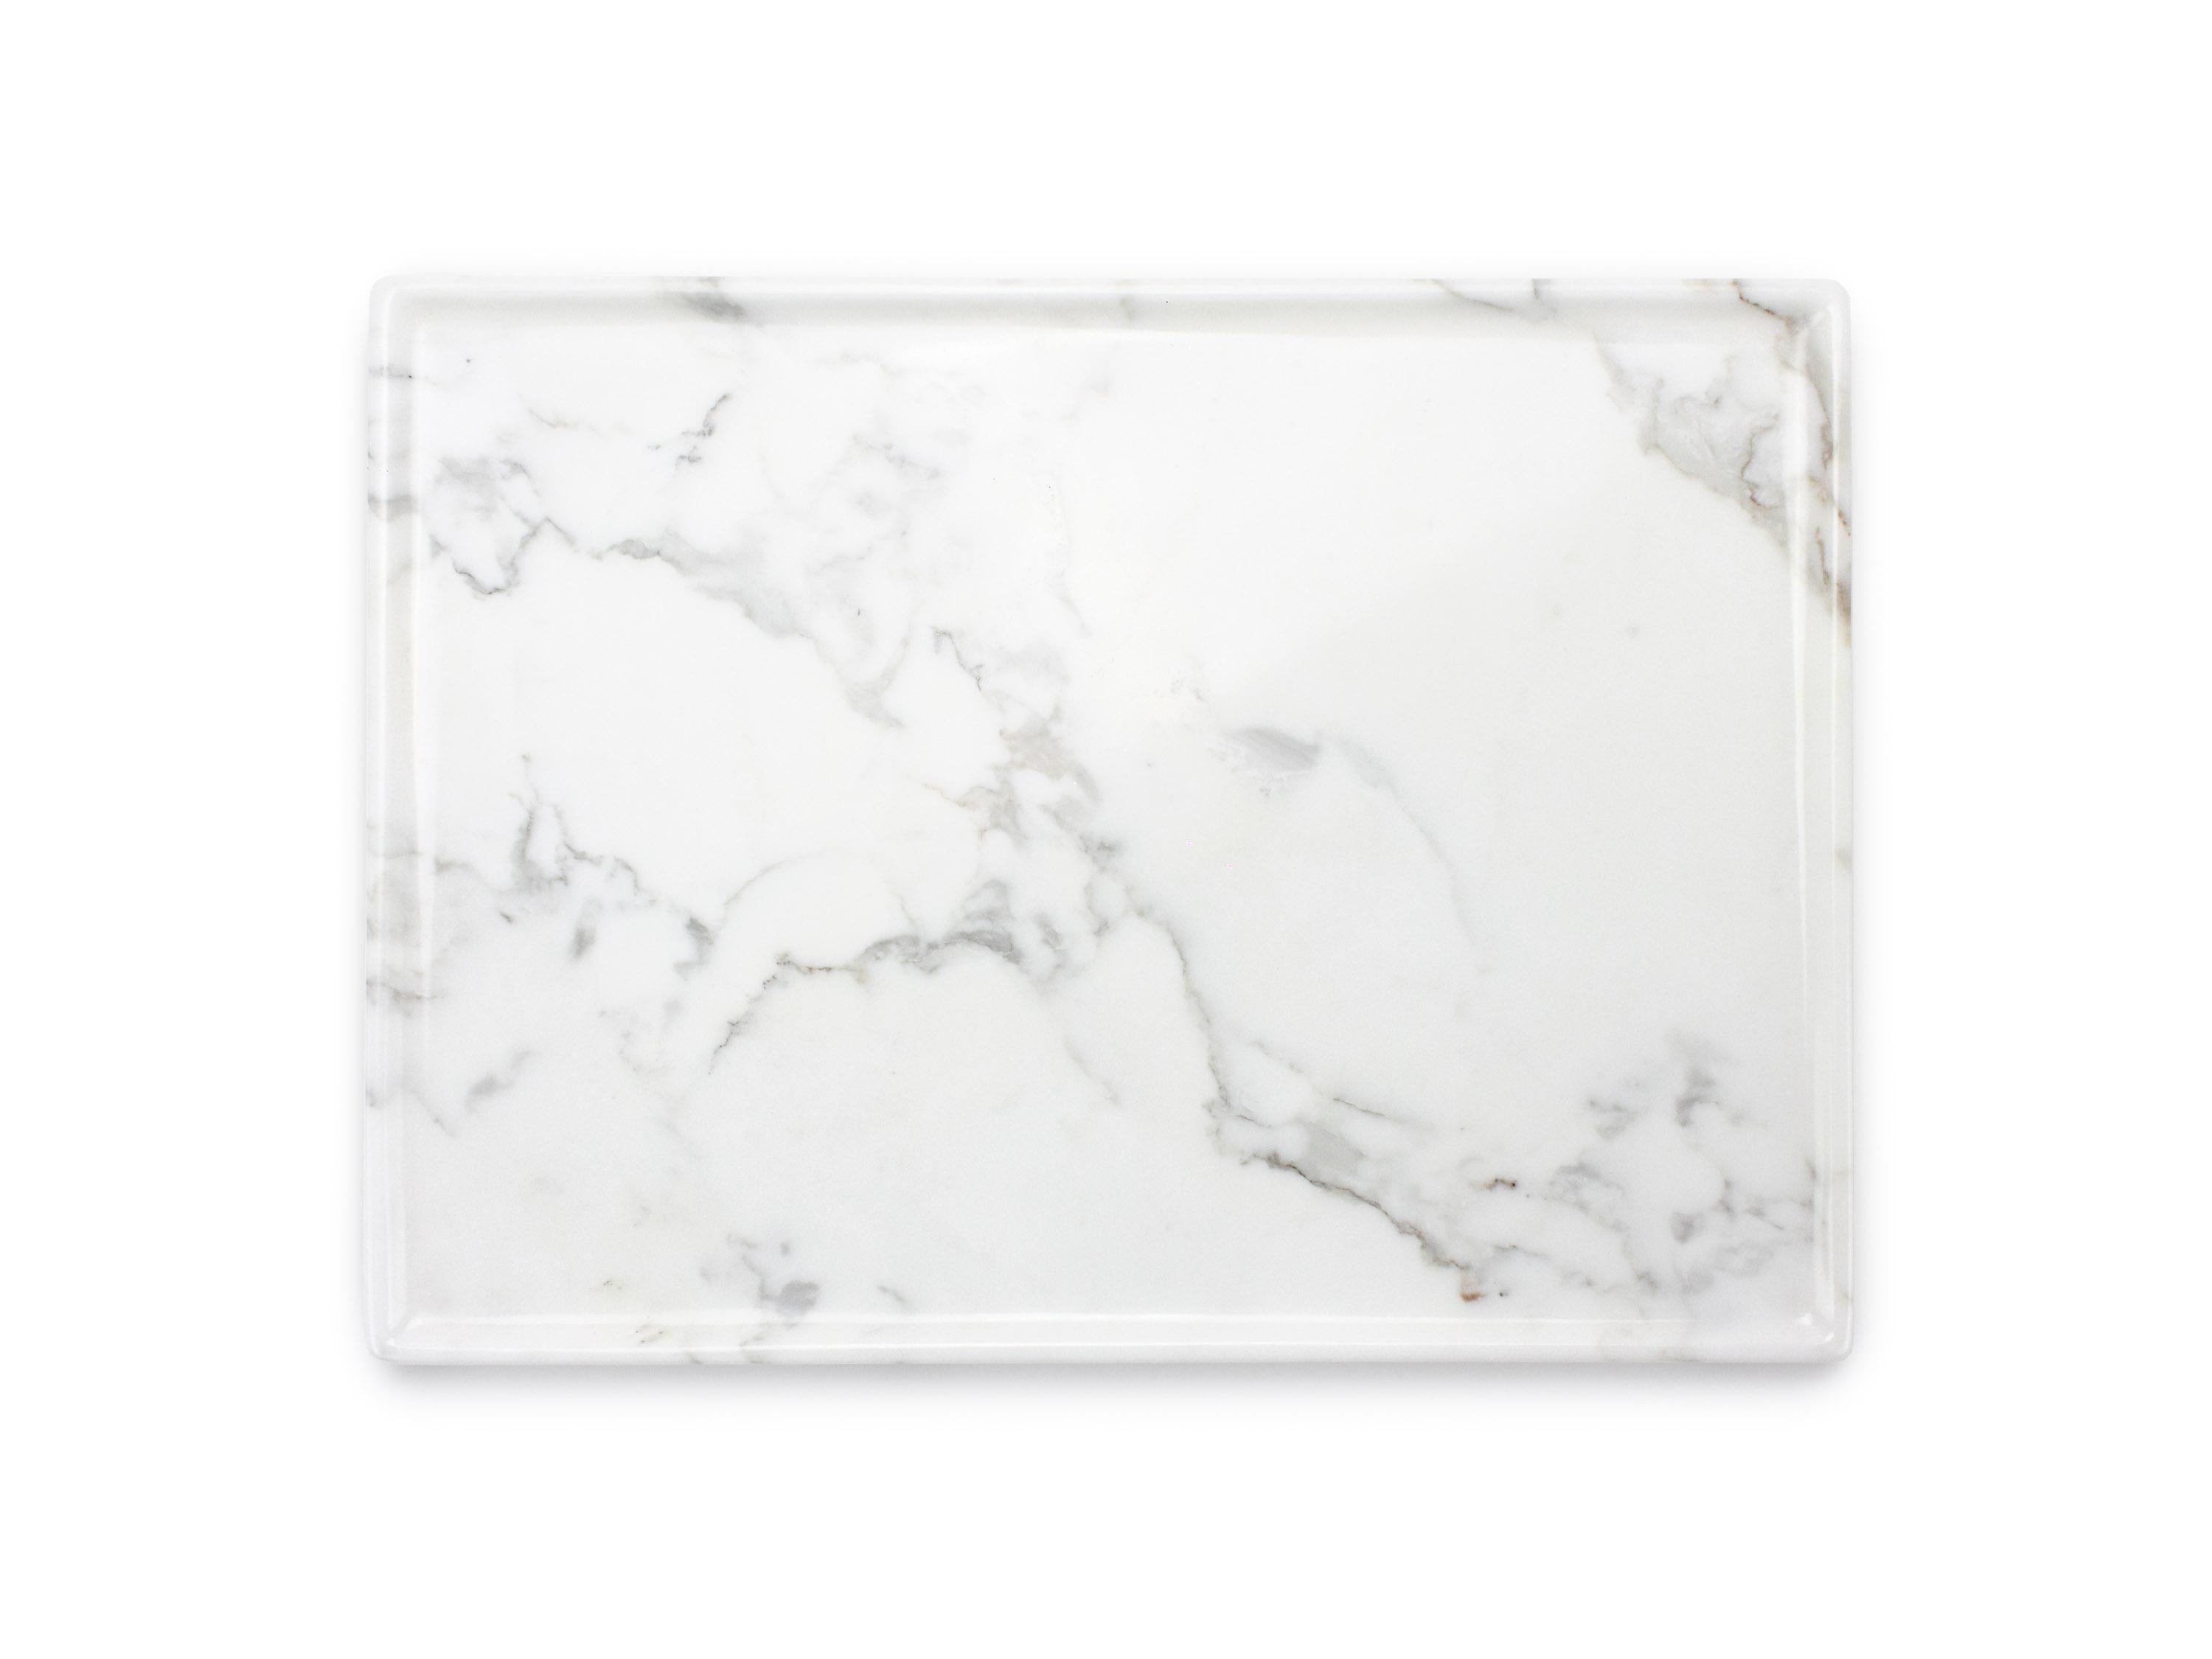 Modern Tray Hand Carved from Solid Block of White Marble, Rectangular, Made in Italy For Sale